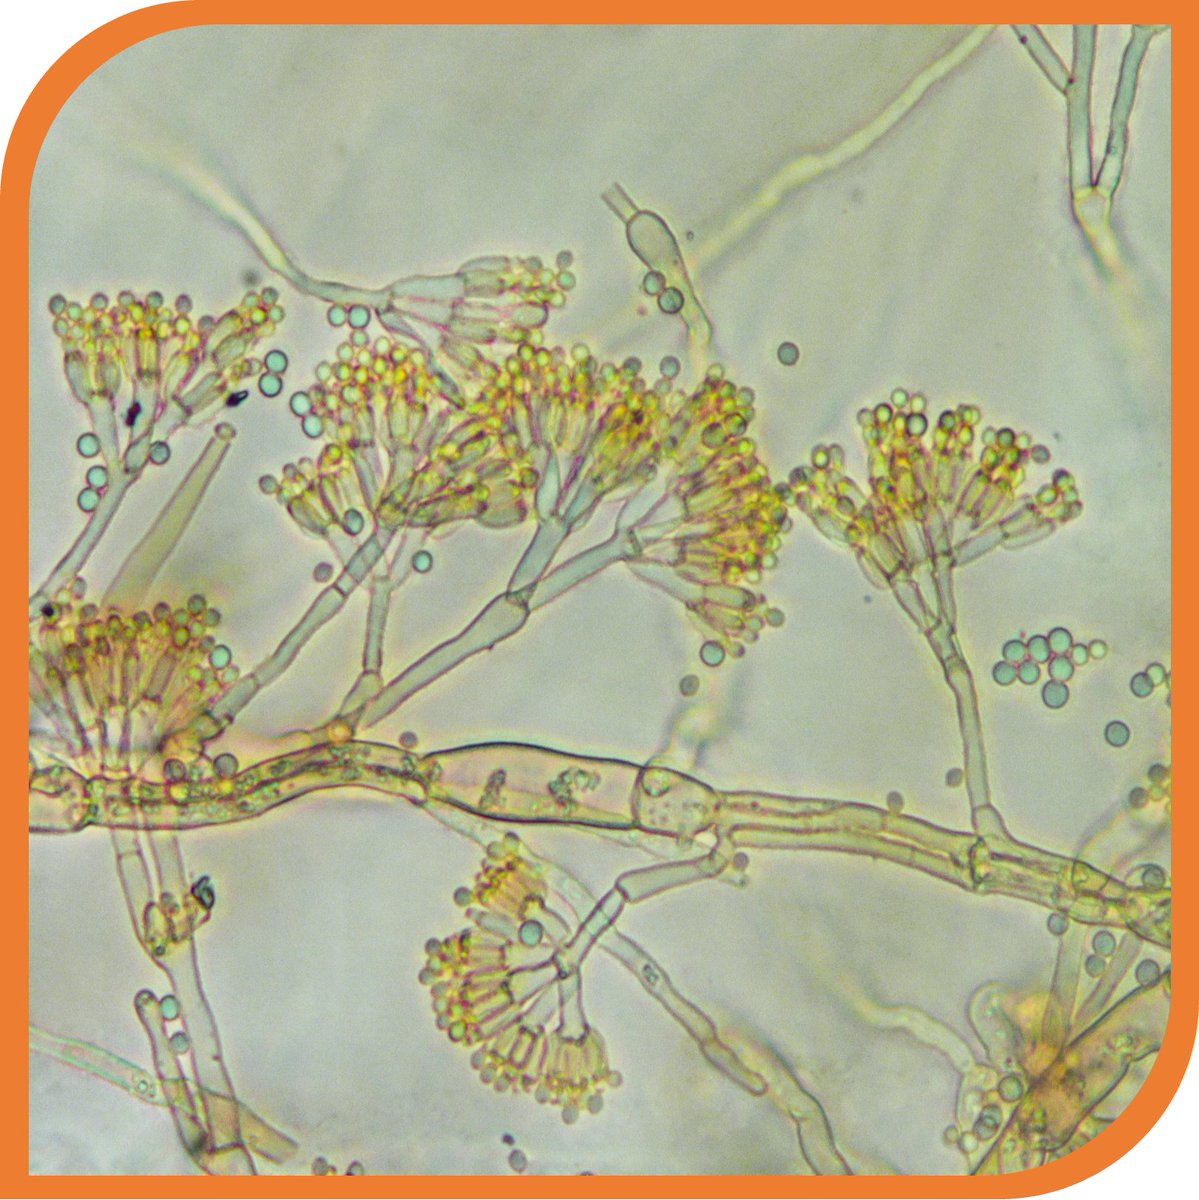 #microbeofthemonth : Penicillium chrysogenum (IHEM 28038)

In 1928, Alexander Fleming discovered #PENICILLIN, the first known #antibiotic. It was named named after the #MOLD that produced it: Penicillium chrysogenum.

#microbiology #fungi

@belspo @sciensano